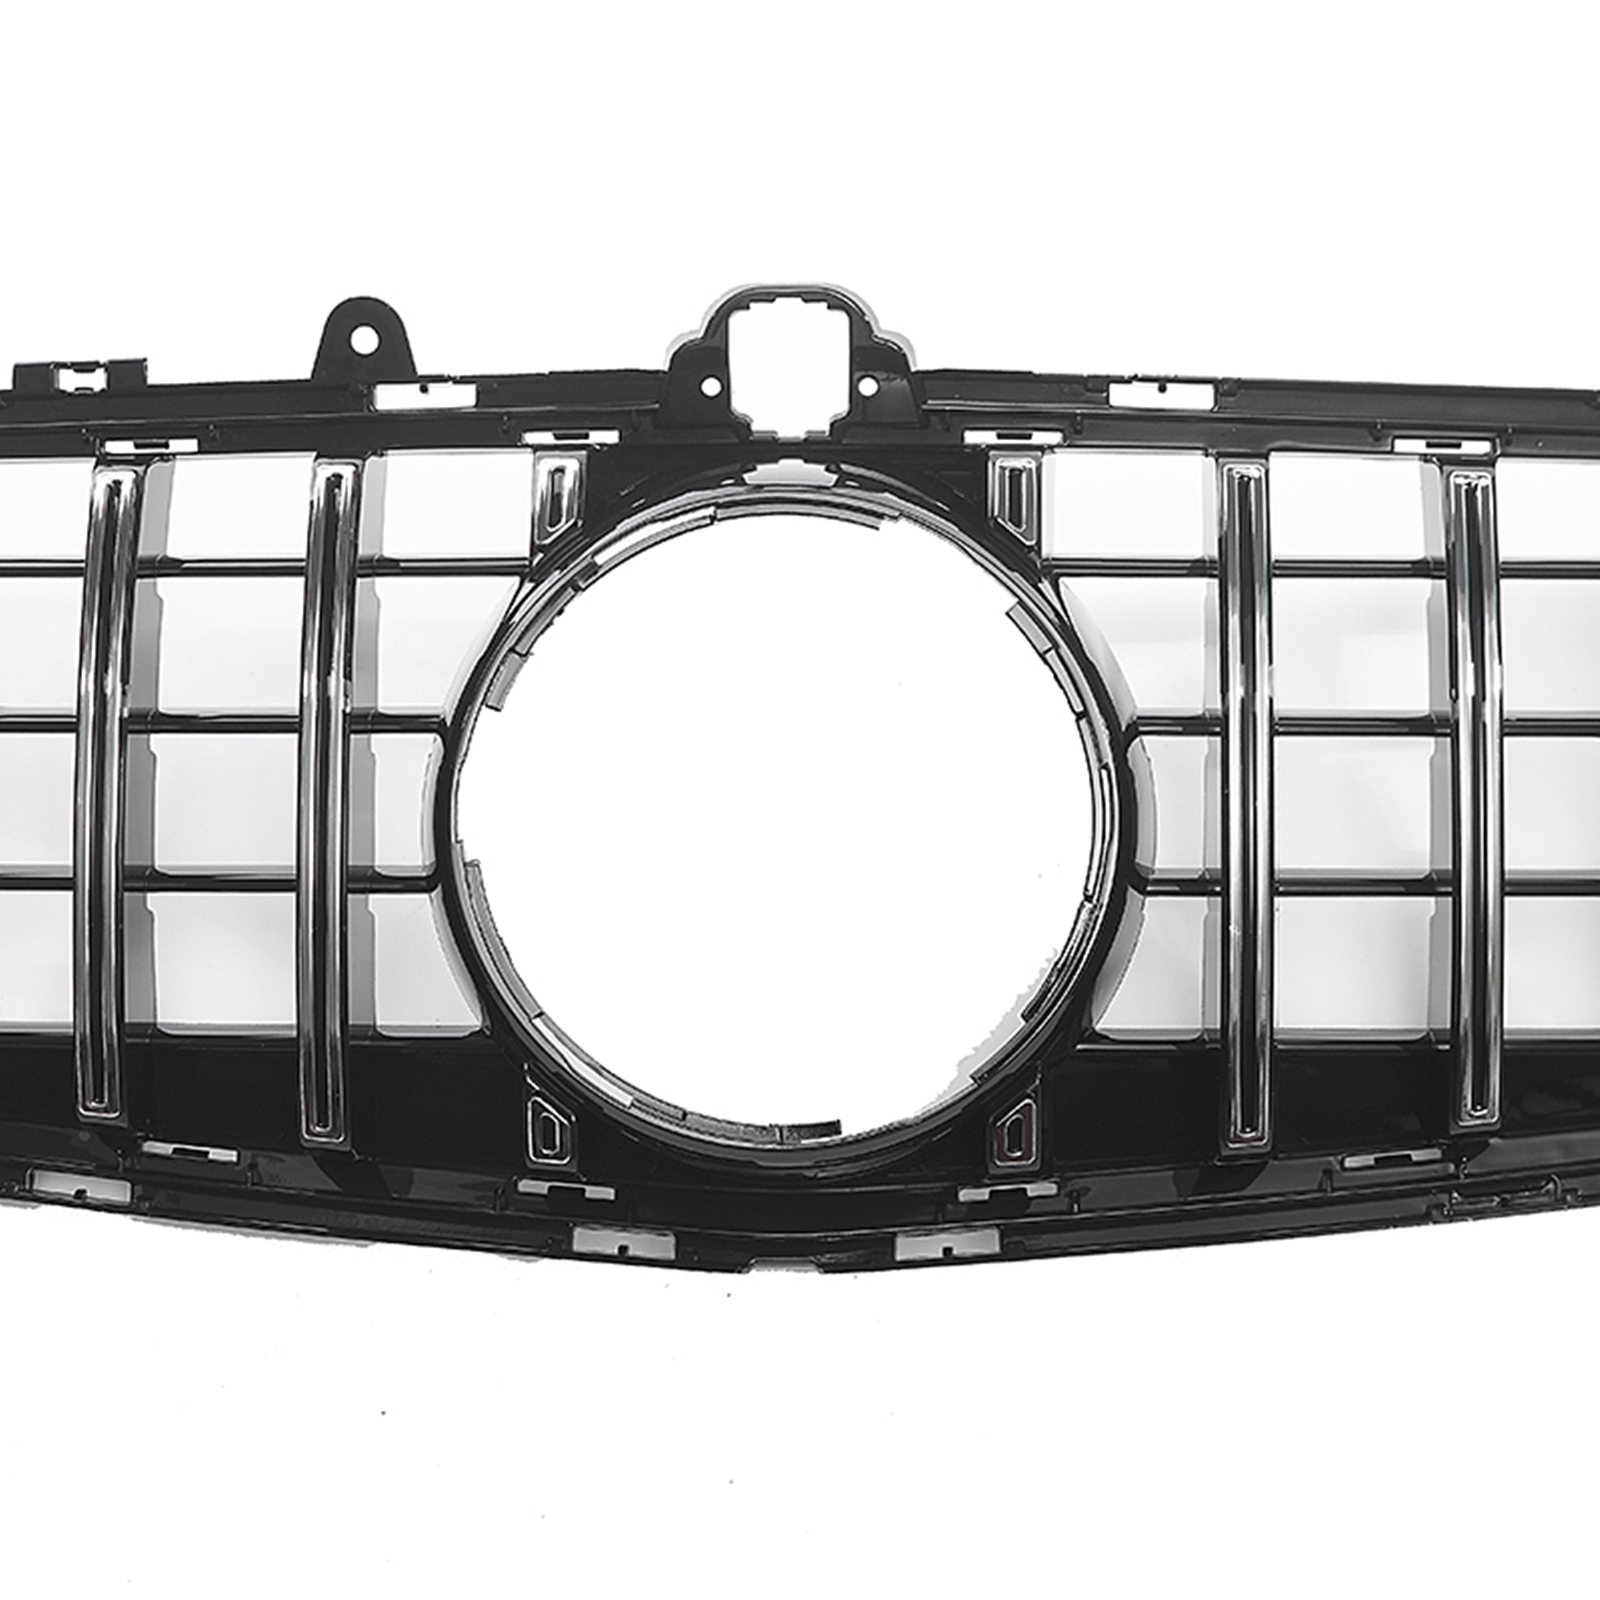 GT R Front Grille For Mercedes Benz CLS-Class CLS 63 W218 2015-2017 CLS550